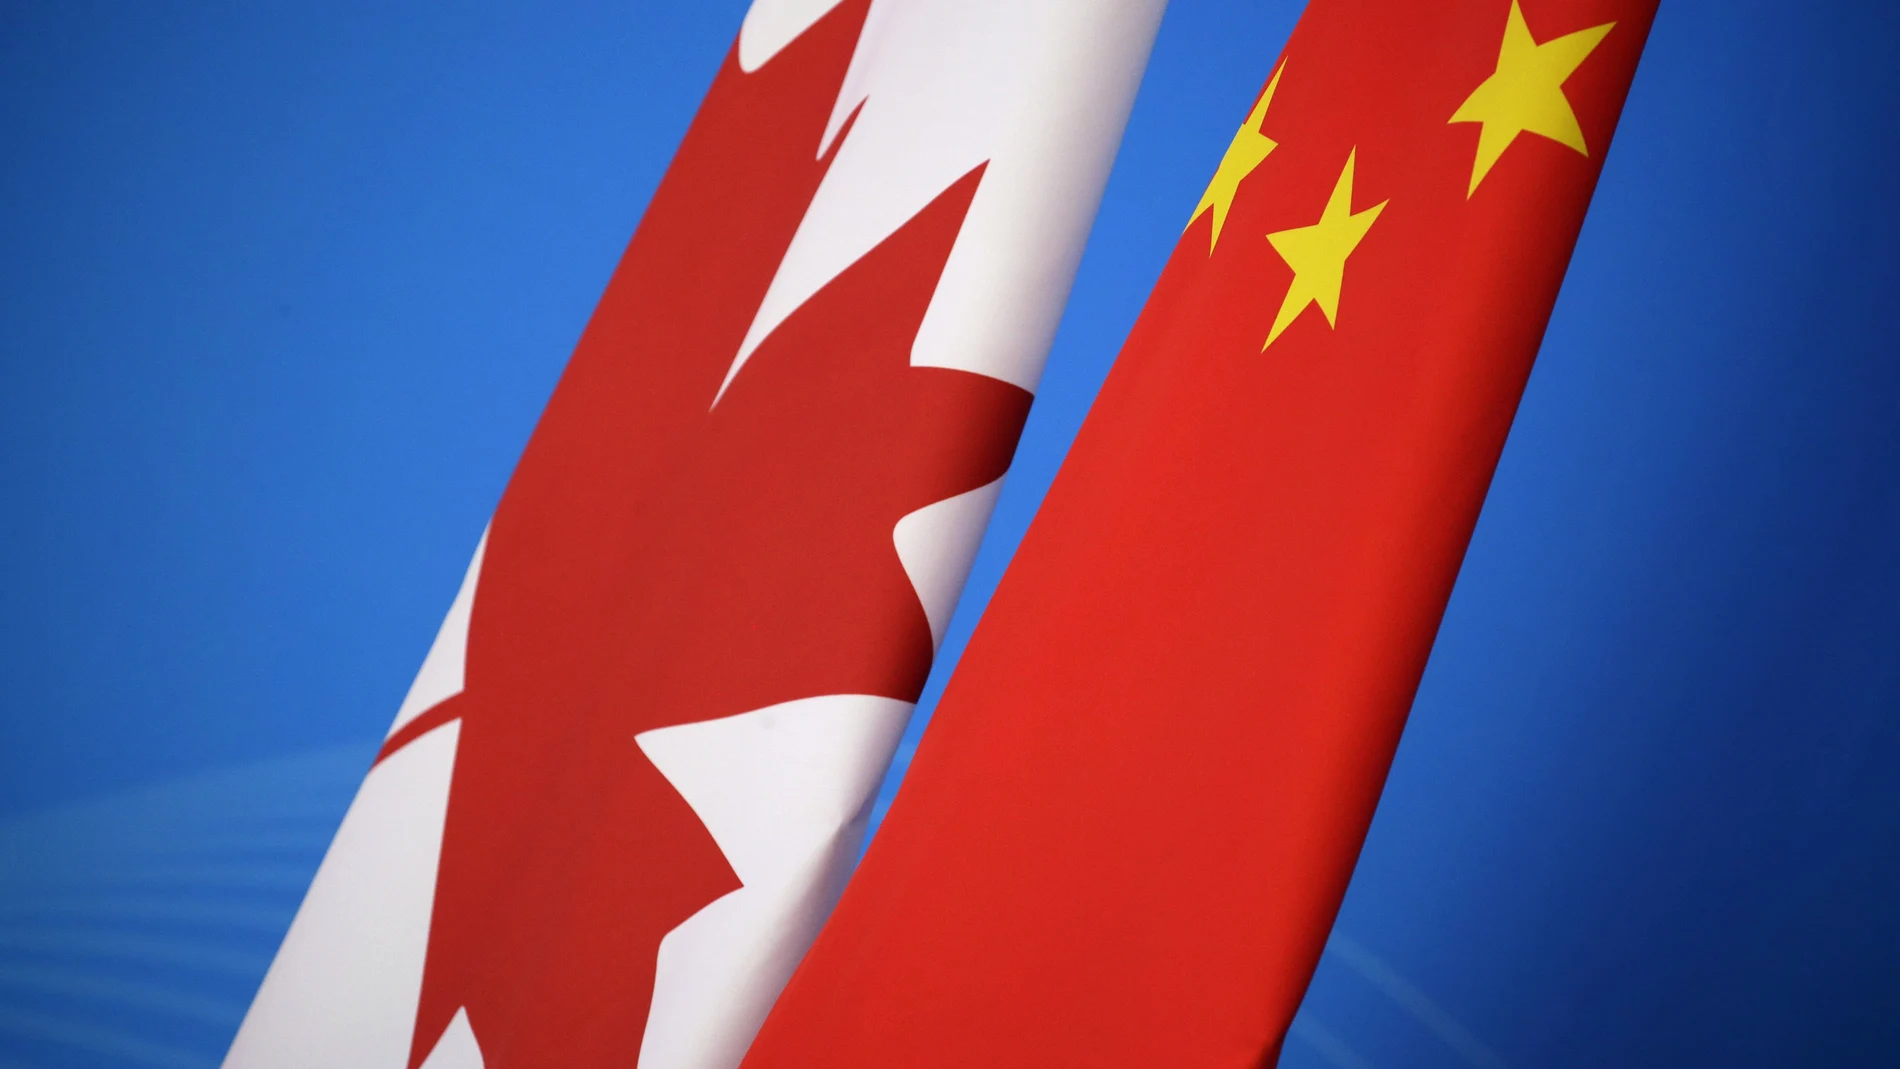 In this Nov. 12, 2018, file photo, flags of Canada and China are placed for the first China-Canada economic and financial strategy dialogue in Beijing, China. China says it has lodged a formal complaint with Canada over T-shirts ordered by one of the countryâ€™s Beijing Embassy staff that allegedly mocked Chinaâ€™s response to the coronavirus outbreak. (Jason Lee/Pool Photo via AP, File)